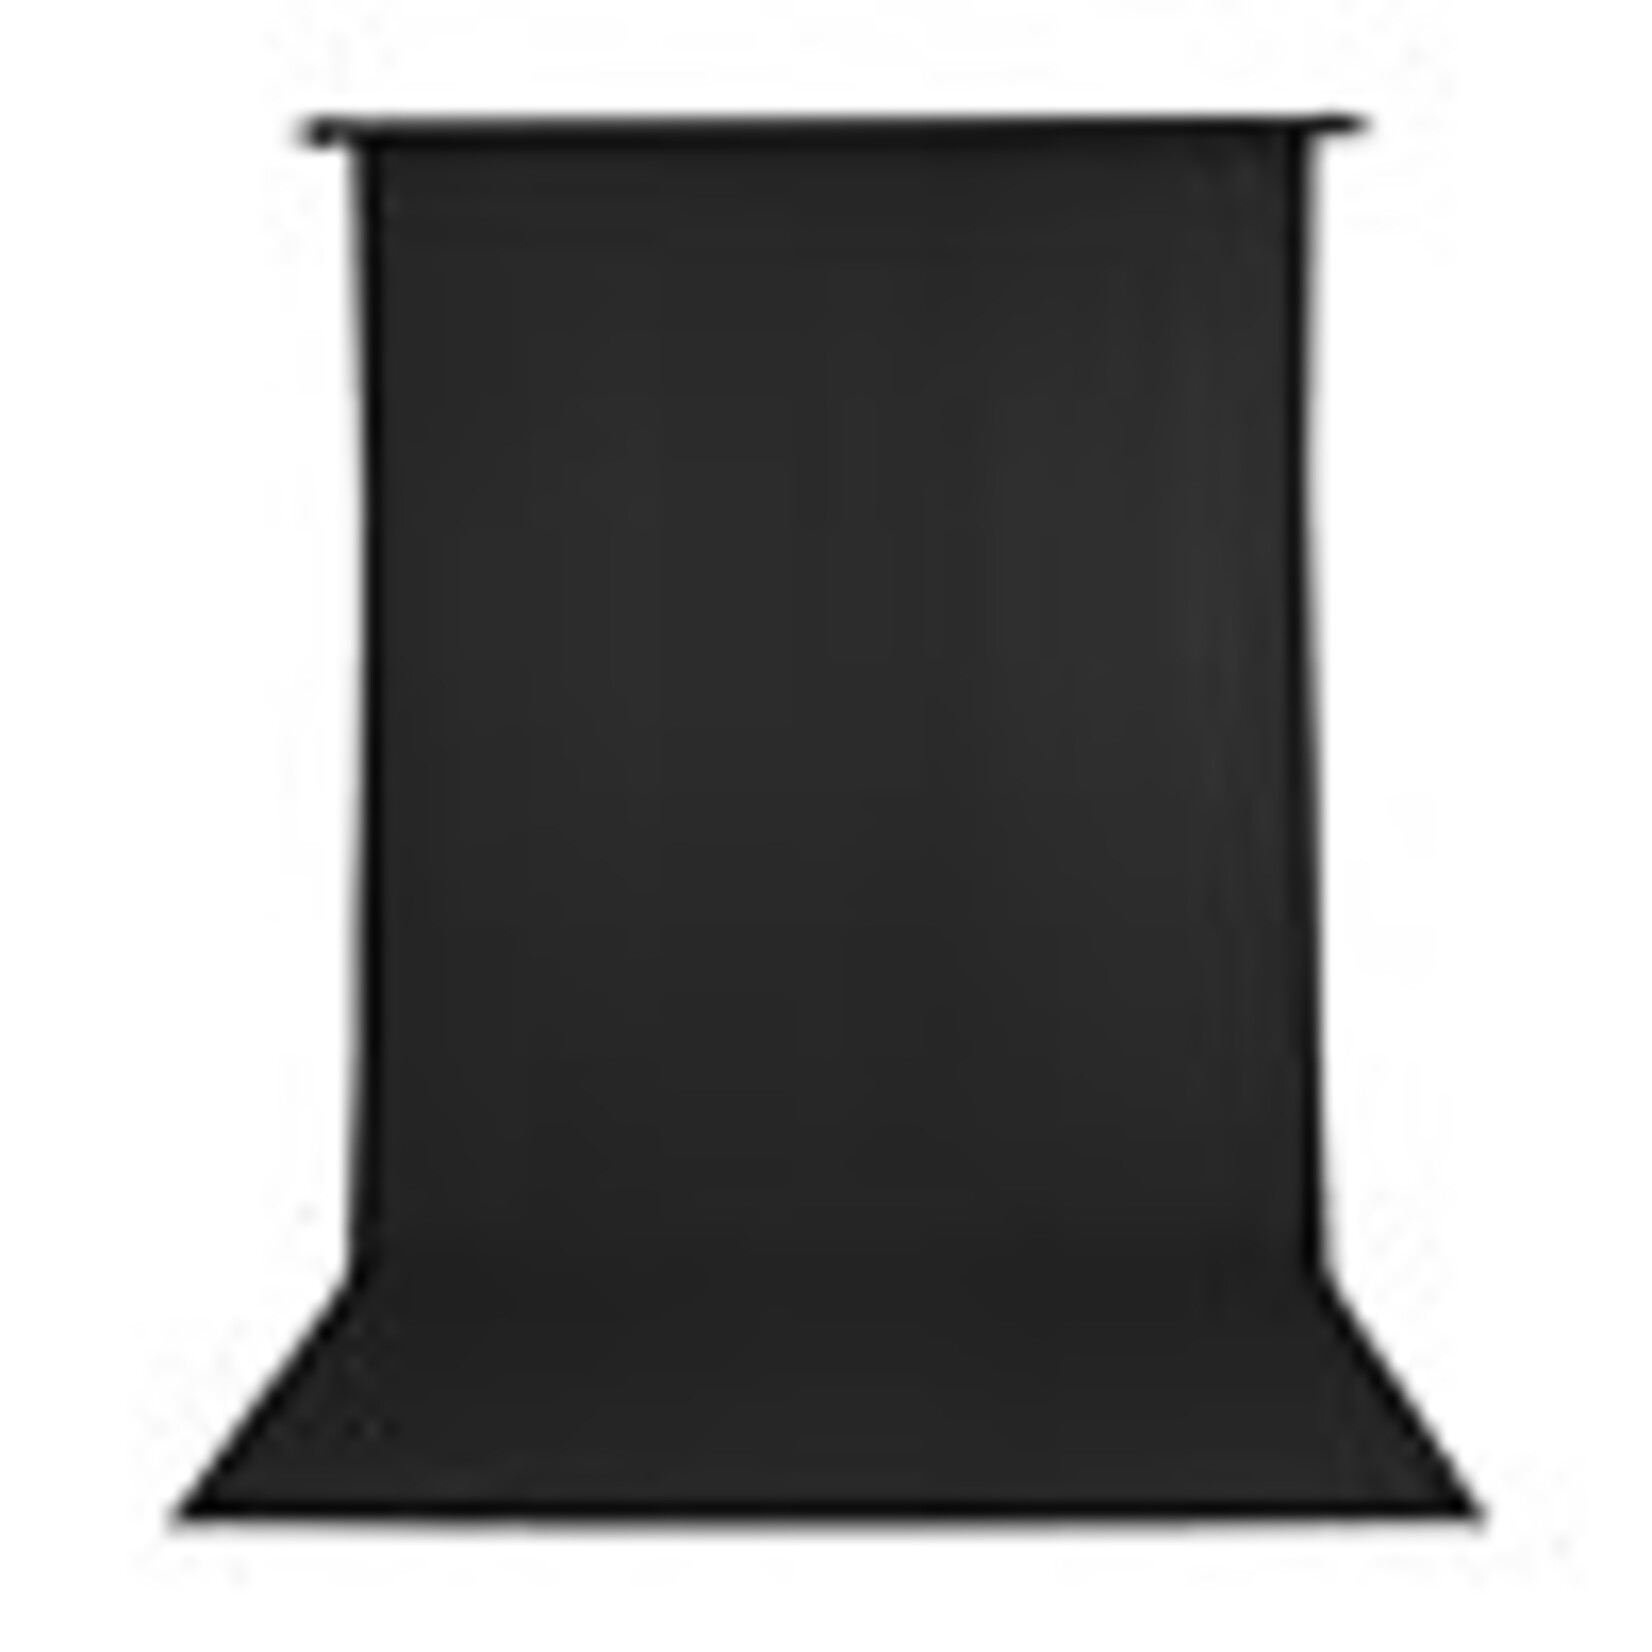 Promaster 10ft x 12ft Black Wrinkle Resistant PRO Background Fabric